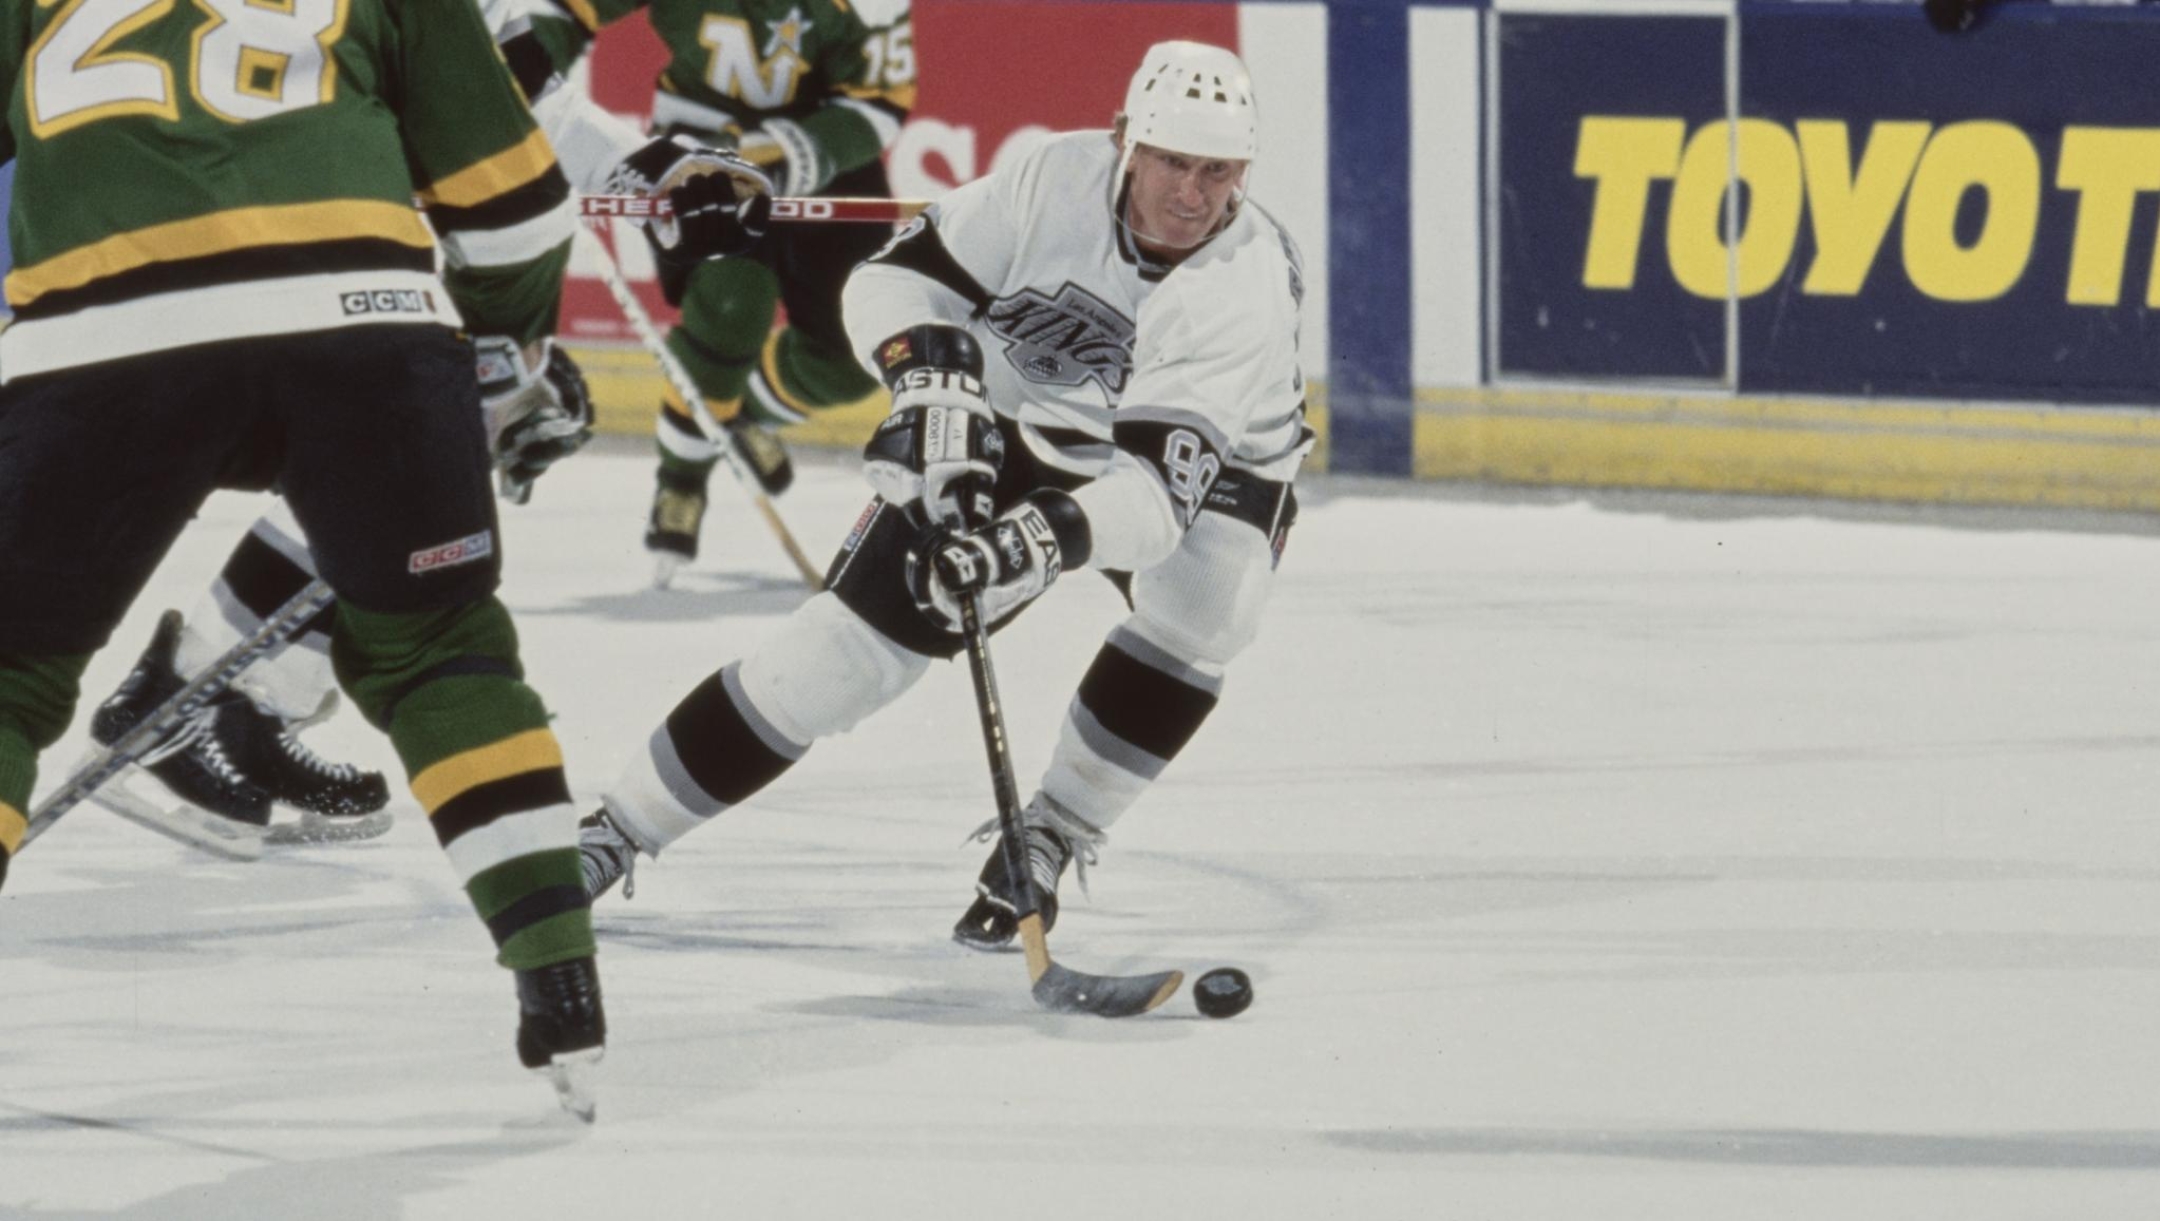 Wayne Gretzky #99, Captain and Center for the Los Angeles Kings in motion on the ice with hockey stick and puck during the NHL Western Conference Pacific Division game against the Minnesota North Stars on 17th October 1990 at the Great Western Forum arena in Inglewood, California, United States.  The Kings won the game 5 - 2  (Photo by Rick Stewart/Allsport/Getty Images)